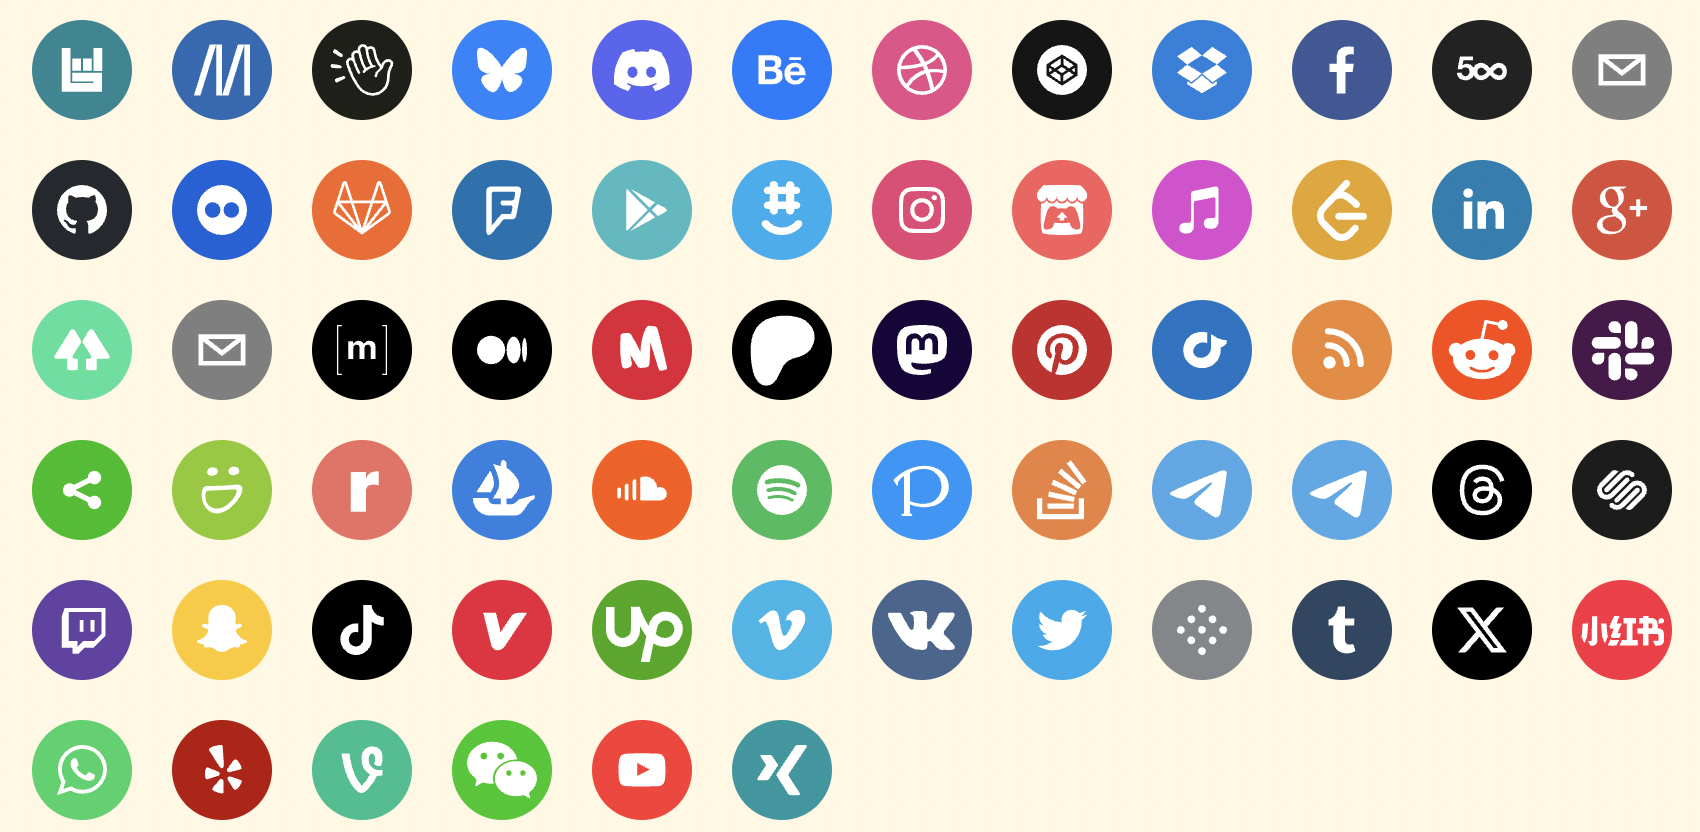 icons for all social networks configured in this library